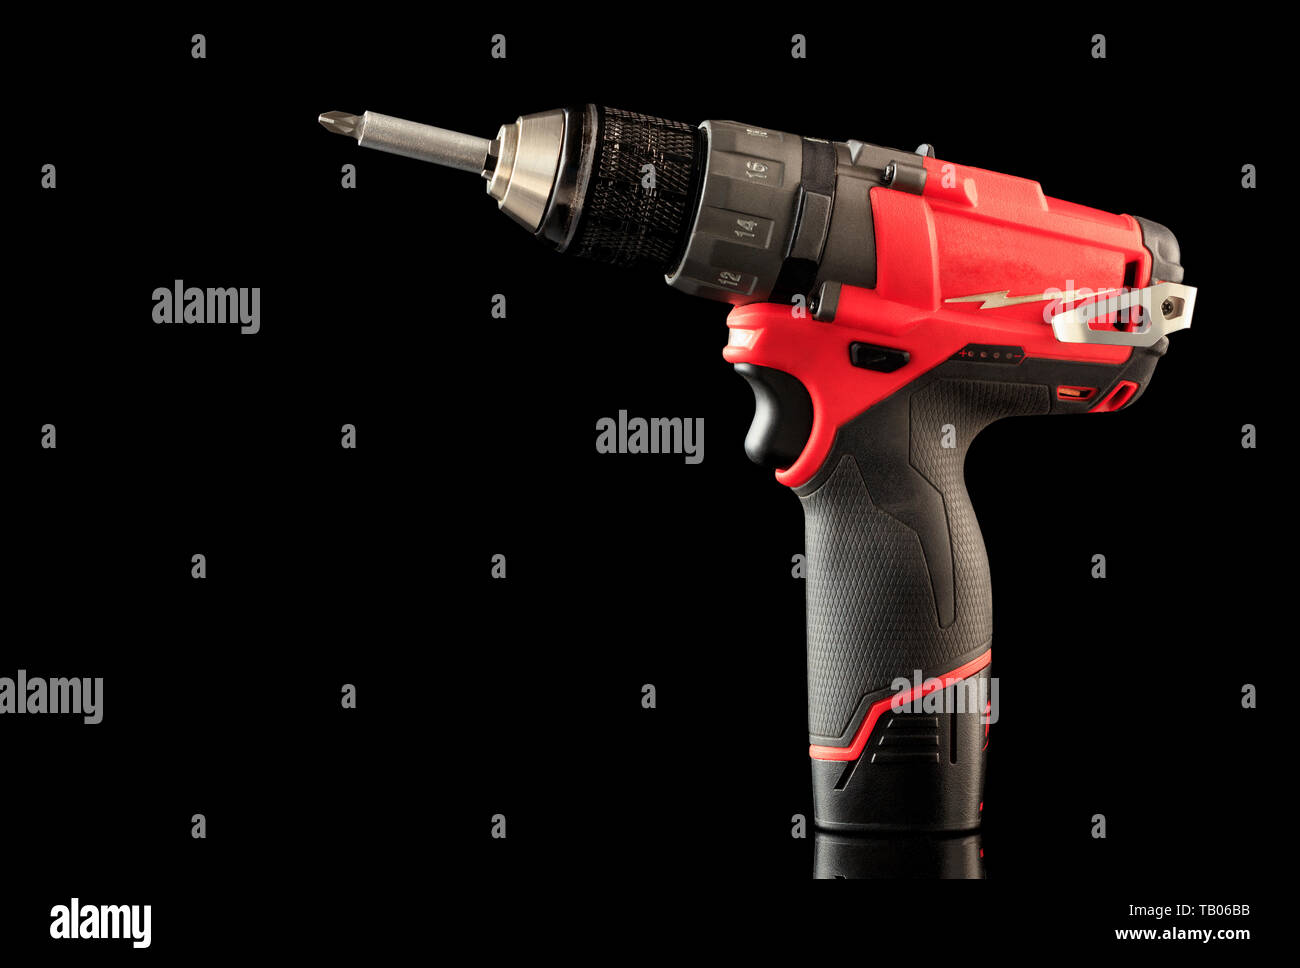 https://c8.alamy.com/comp/TB06BB/cordless-drill-driver-in-red-with-rubberized-handle-in-profile-isolated-on-black-background-with-reflection-TB06BB.jpg